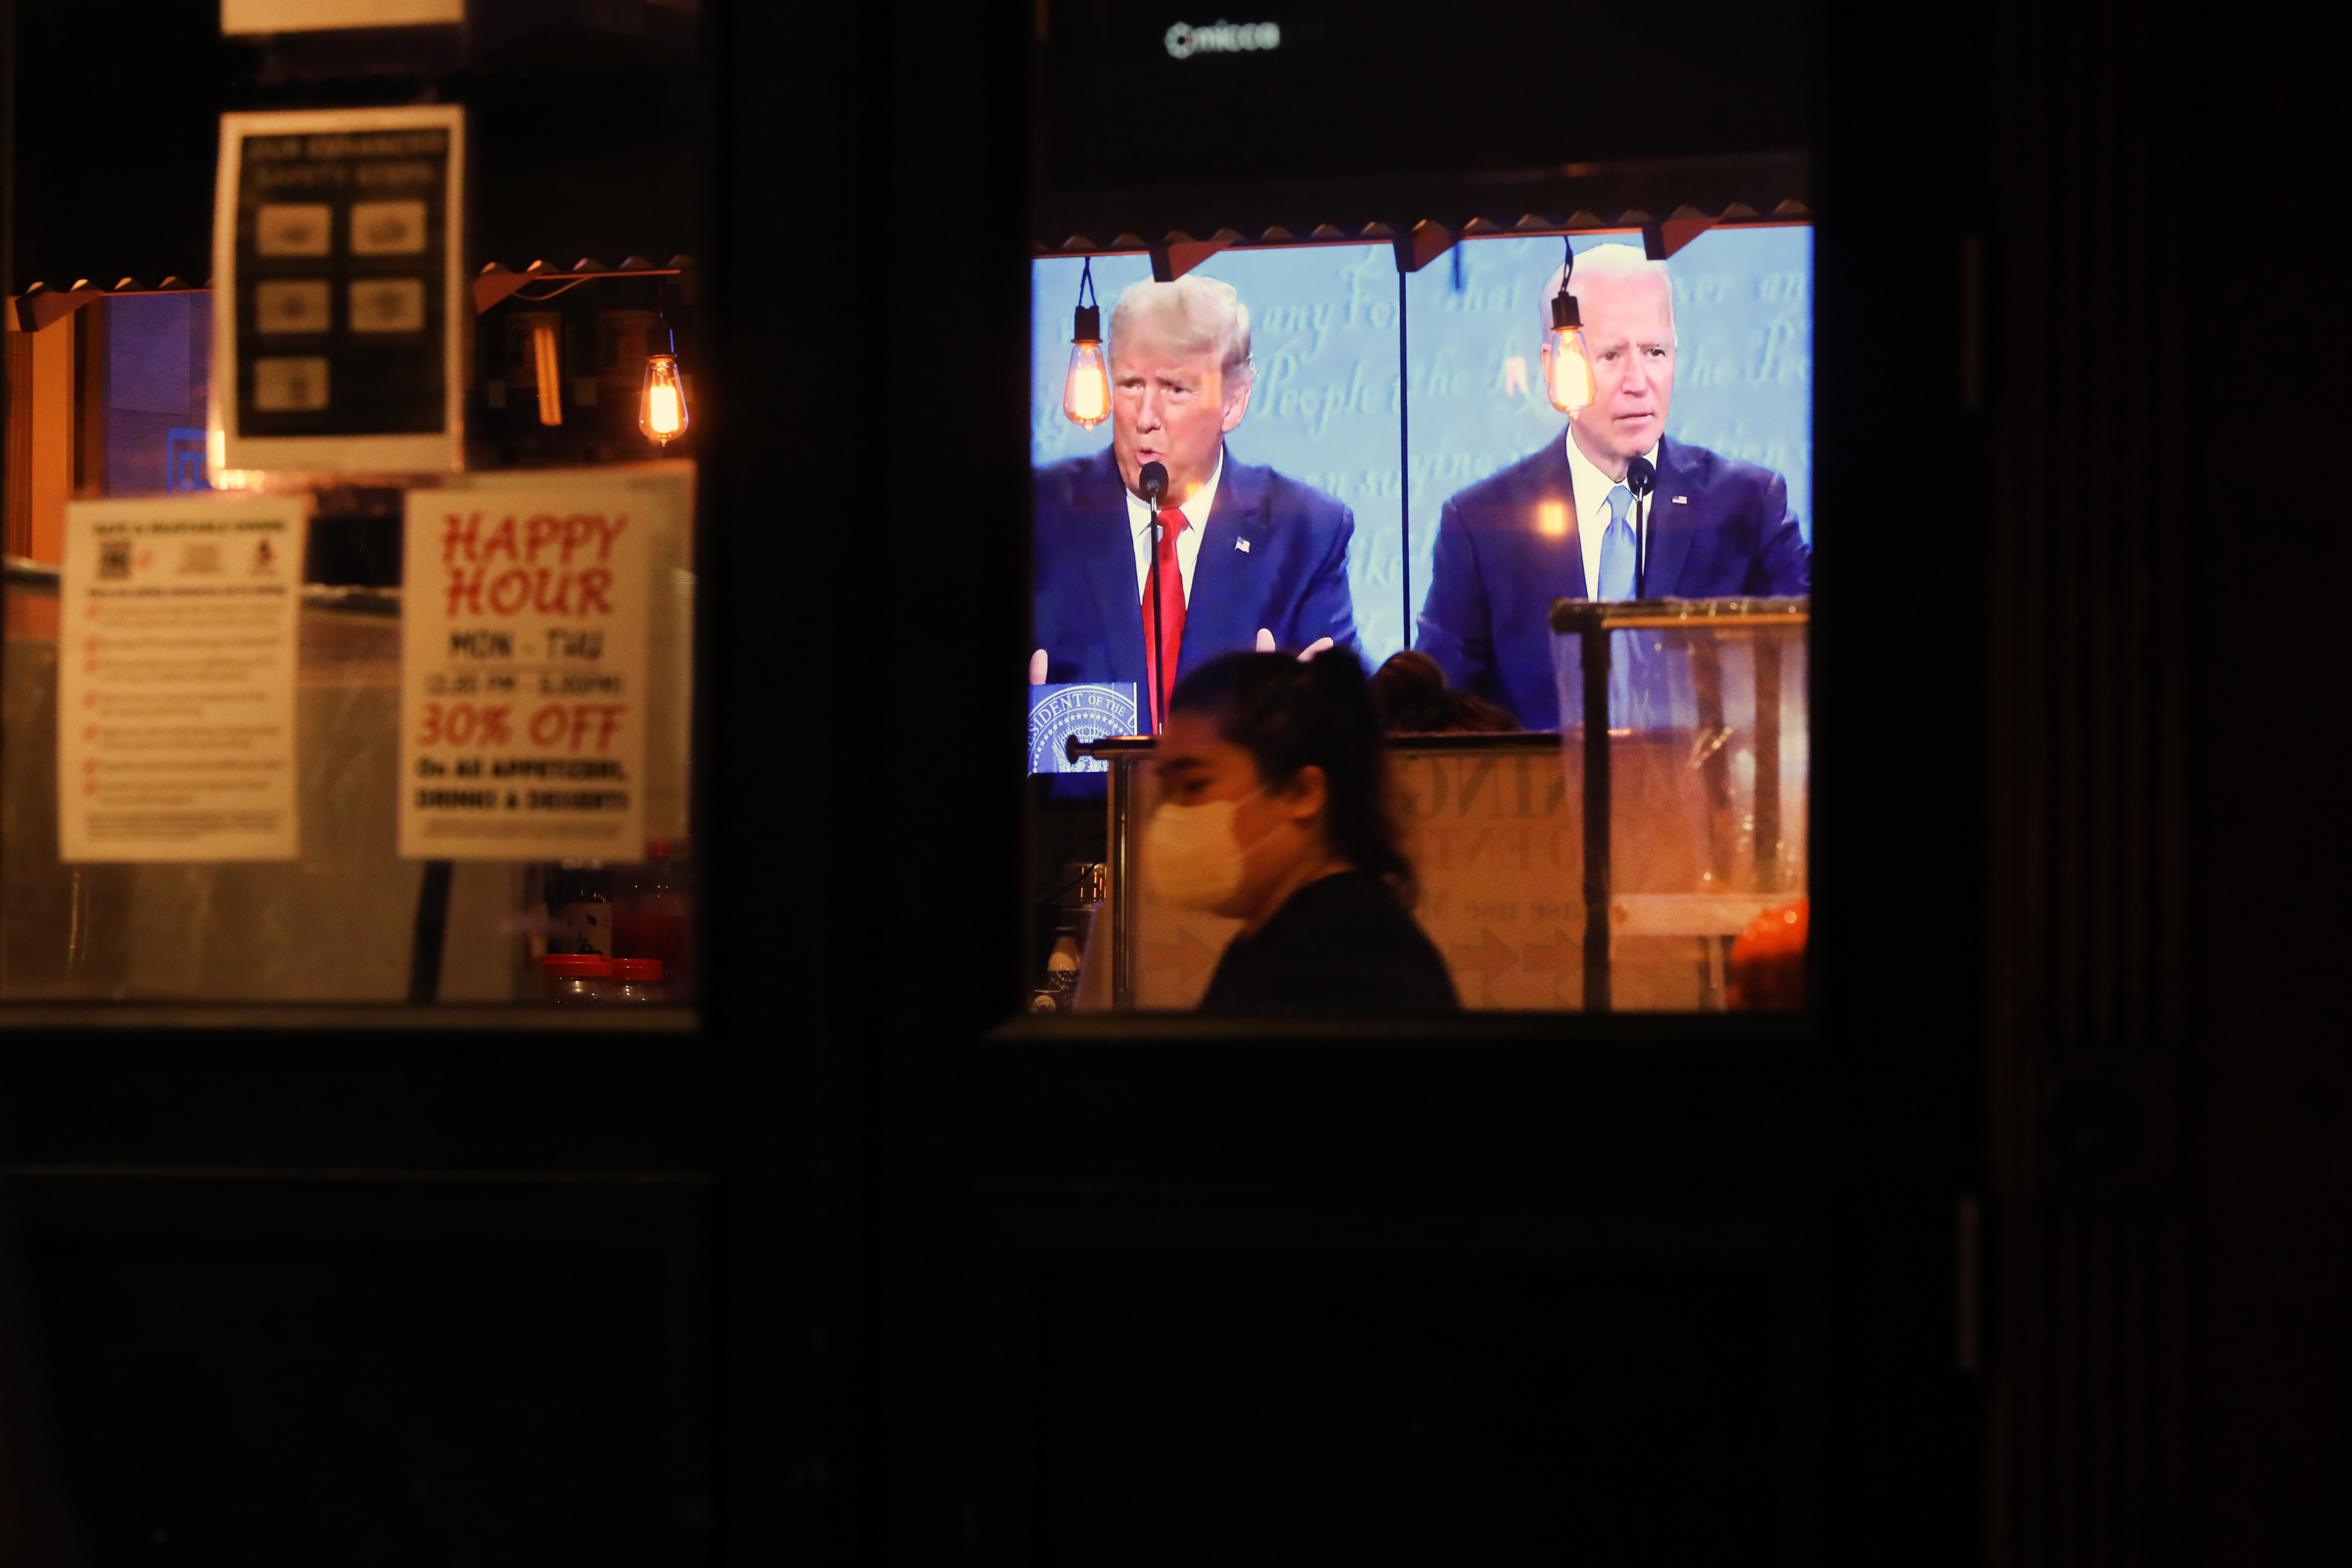 Donald Trump and Joe Biden appear on a TV screen inside a dimly lit restaurant, as a person in a mask stands in the foreground